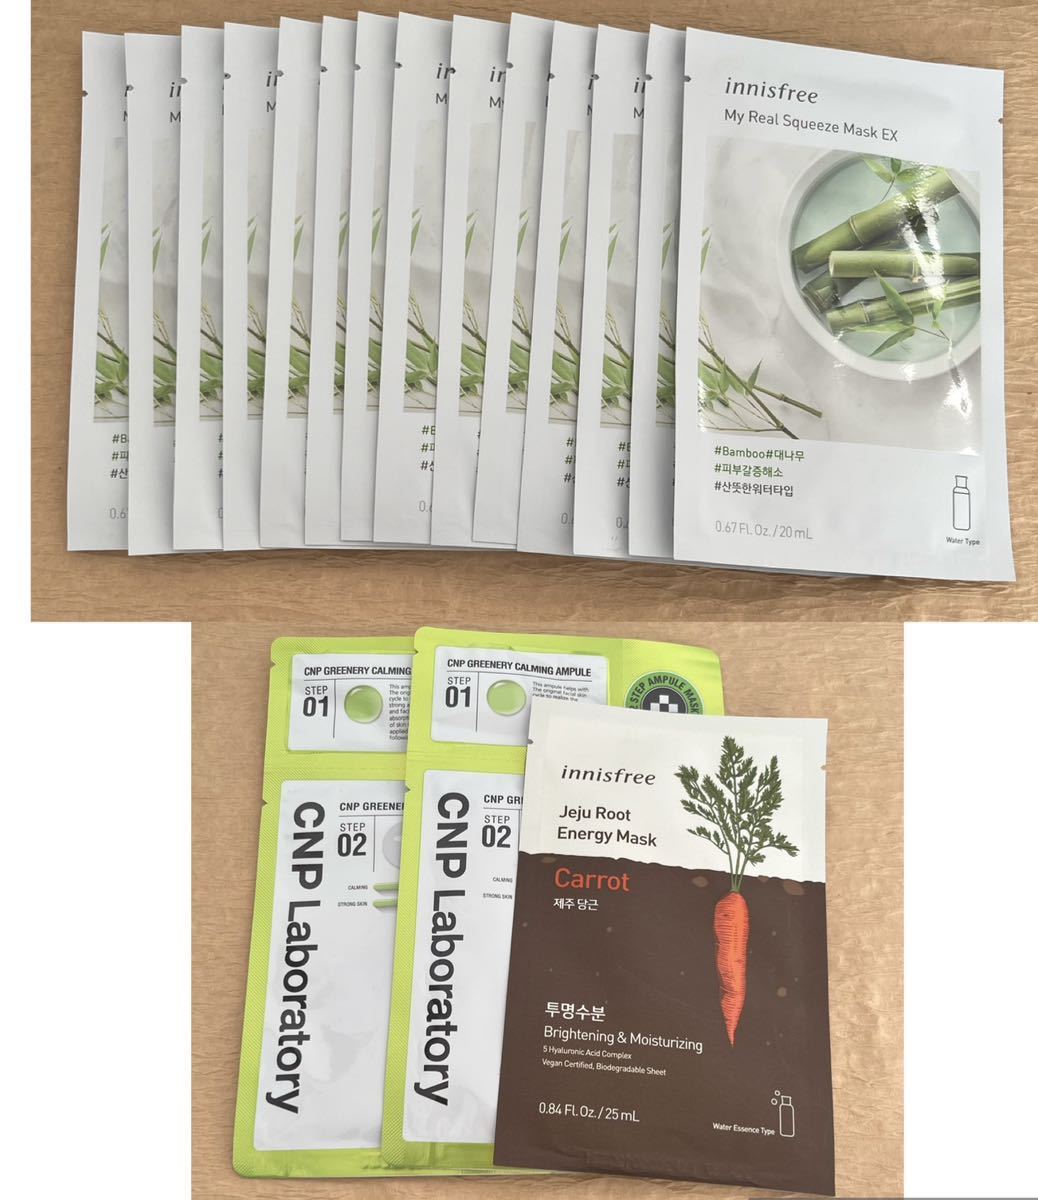  free shipping with translation Innisfree my real squishy mask seat bamboo CNP Gree na Lee car ming amplifier mask other 17 sheets set sale ②